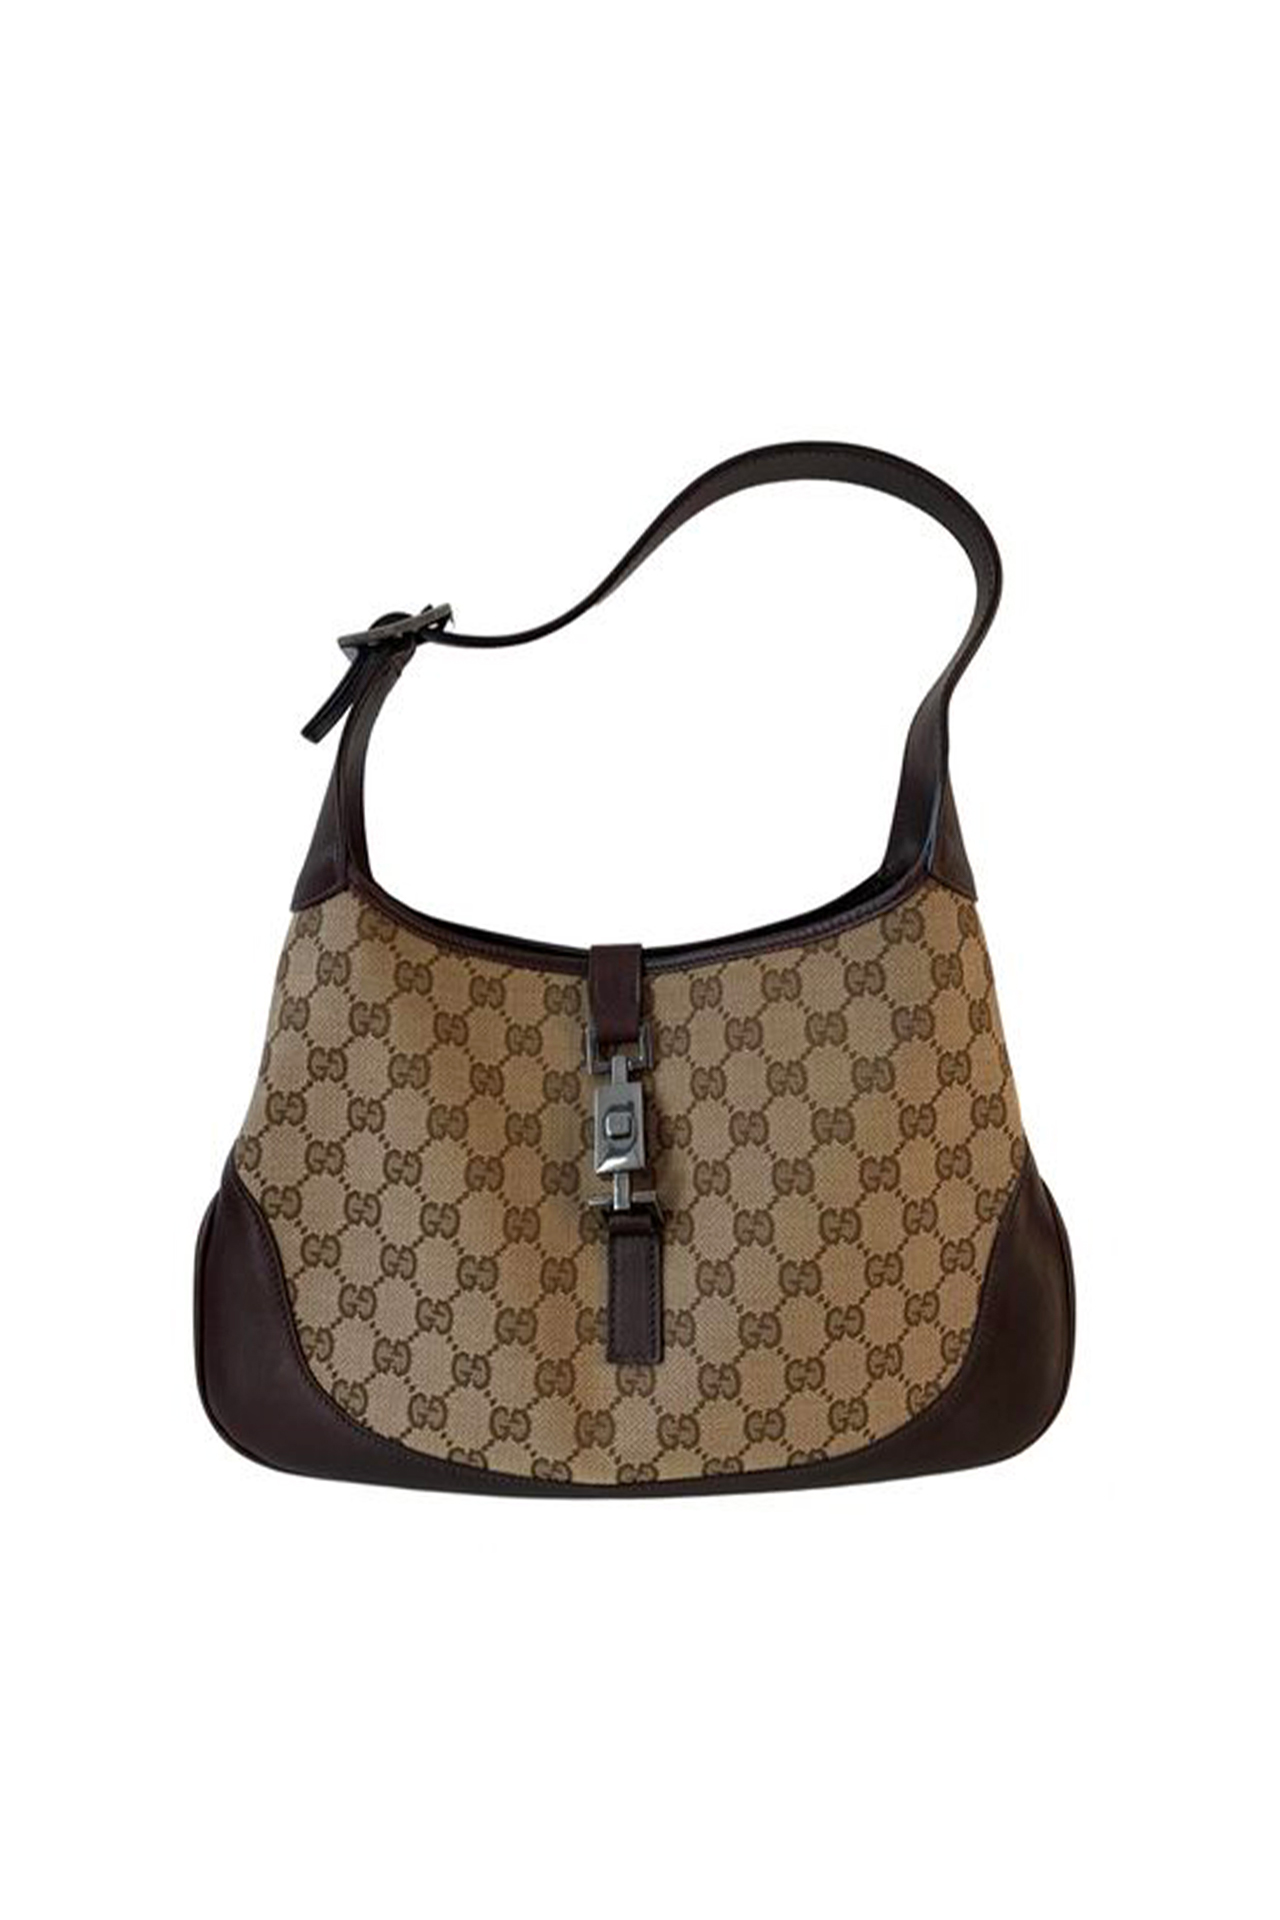 Céline Classic bag for Women  Buy or Sell you Designer bags - Vestiaire  Collective